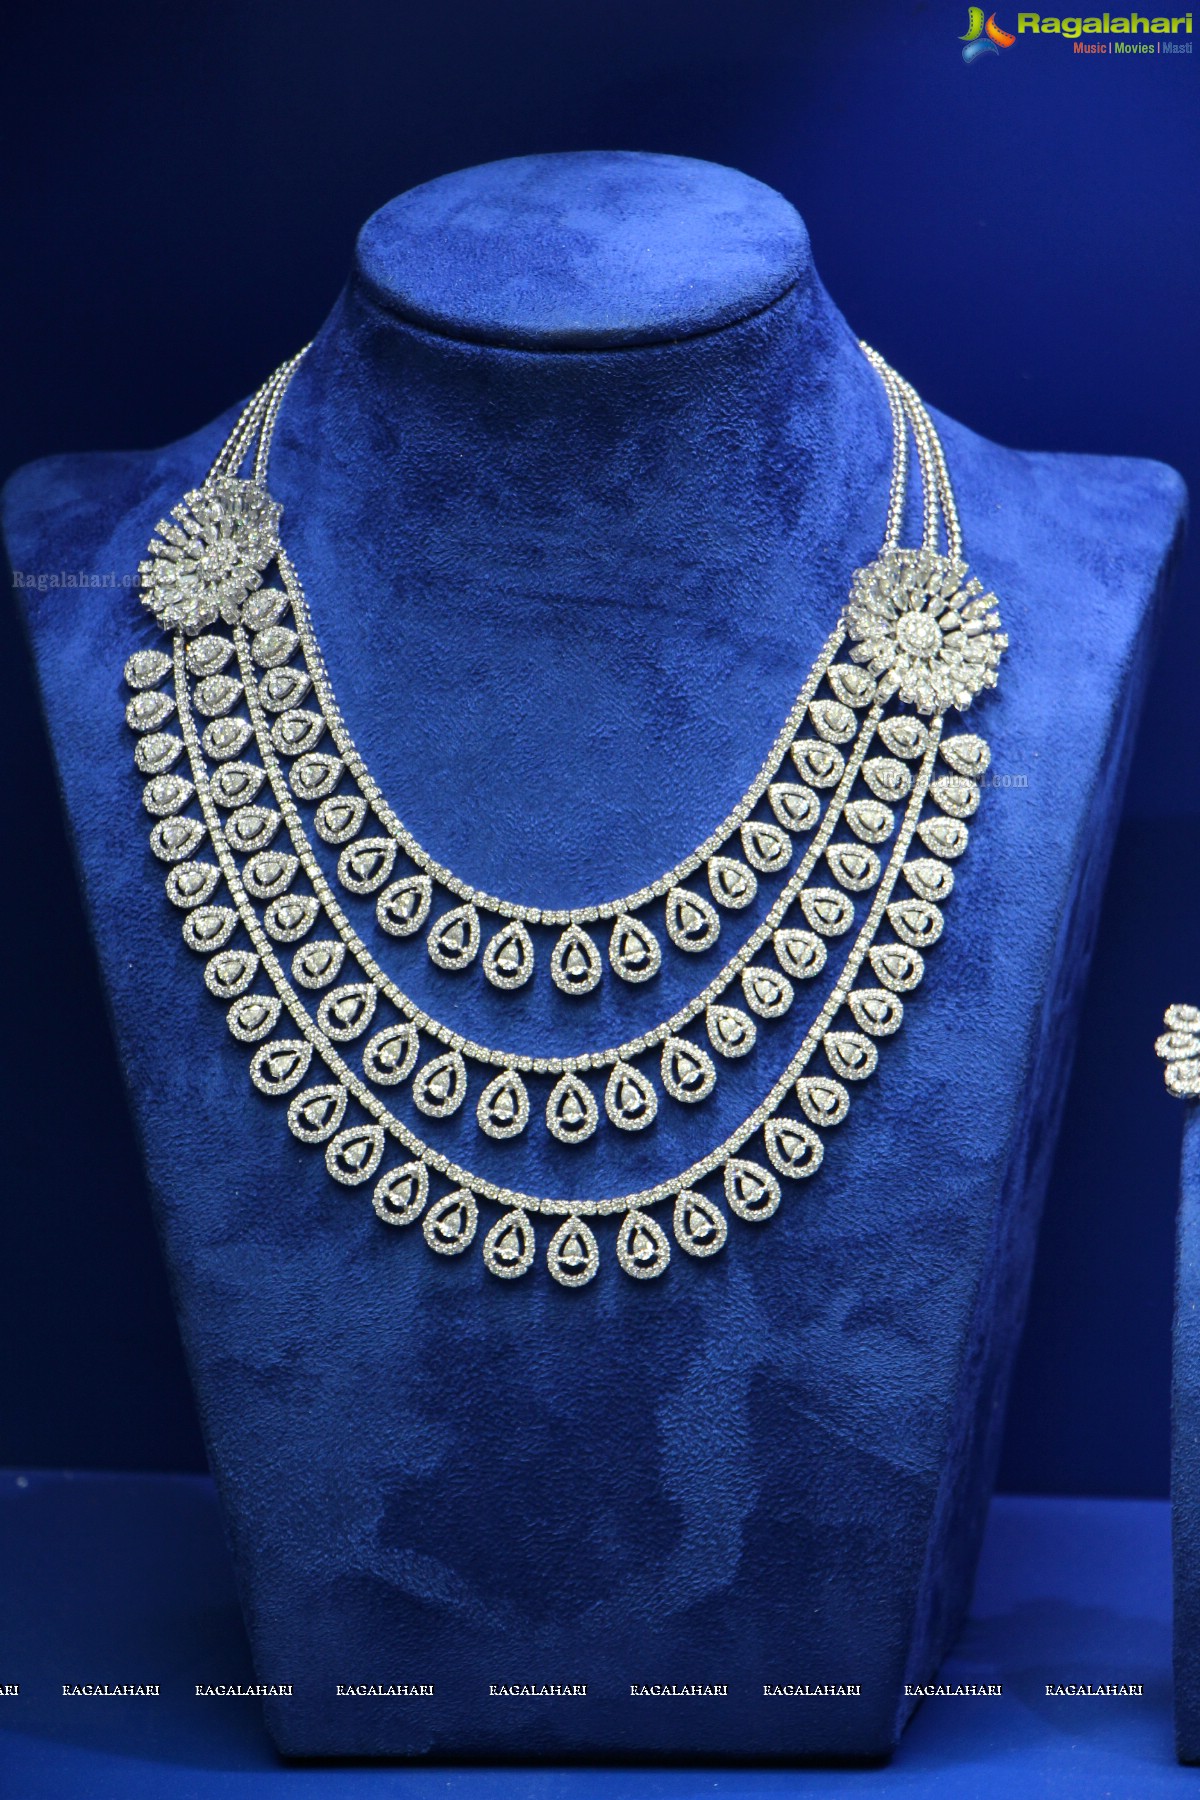 Jewels of Asia - The Couture Show Exhibition 2014